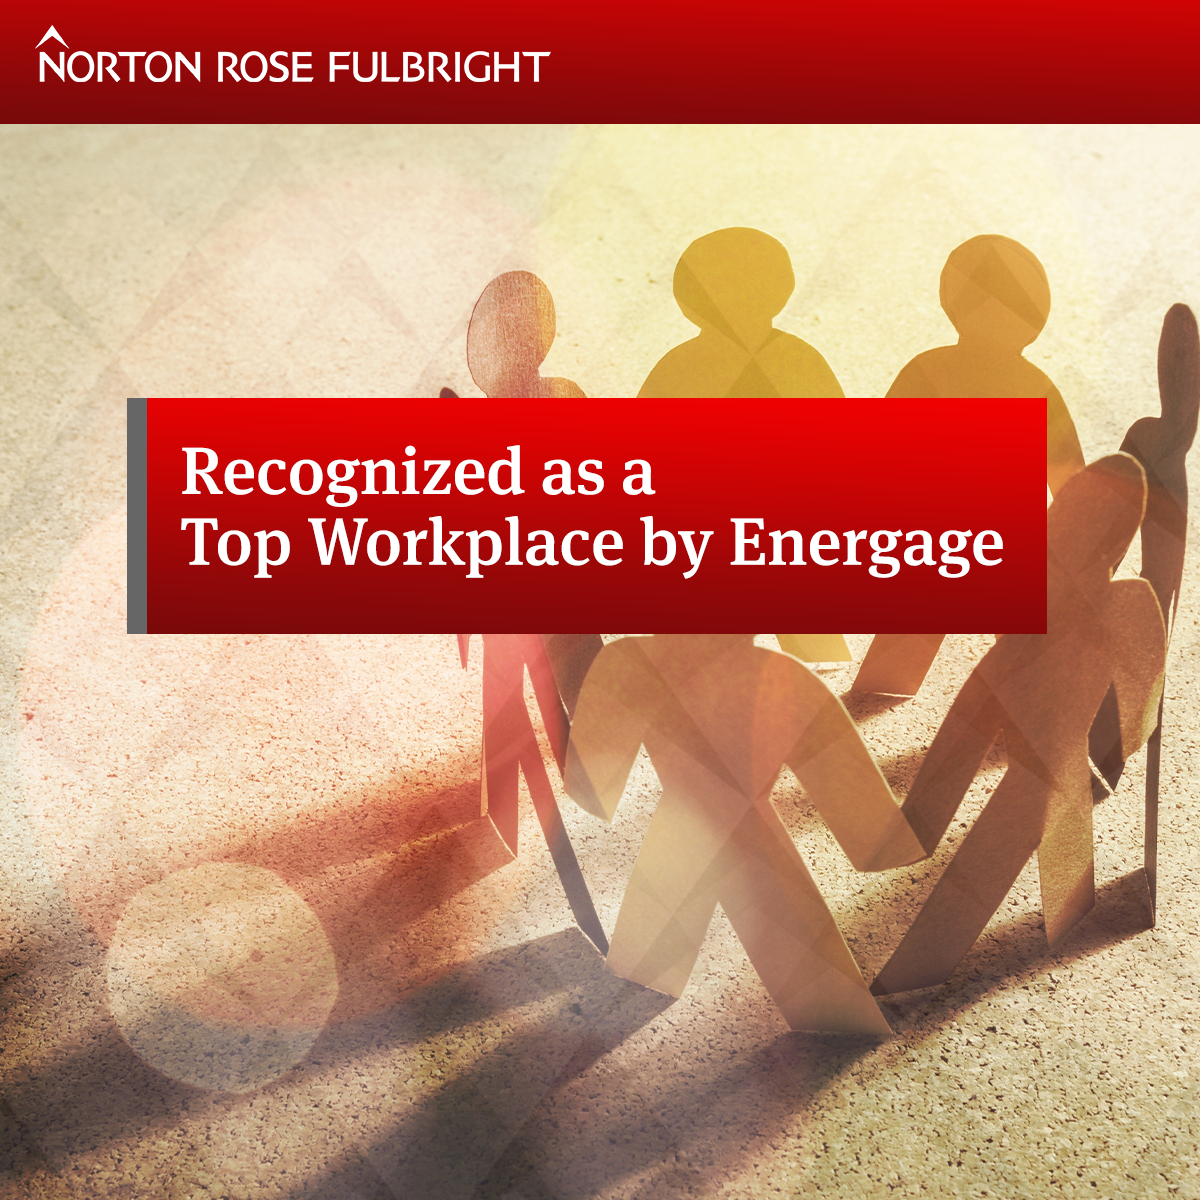 Energage names firm a Top Workplace in US Norton Rose Fulbright